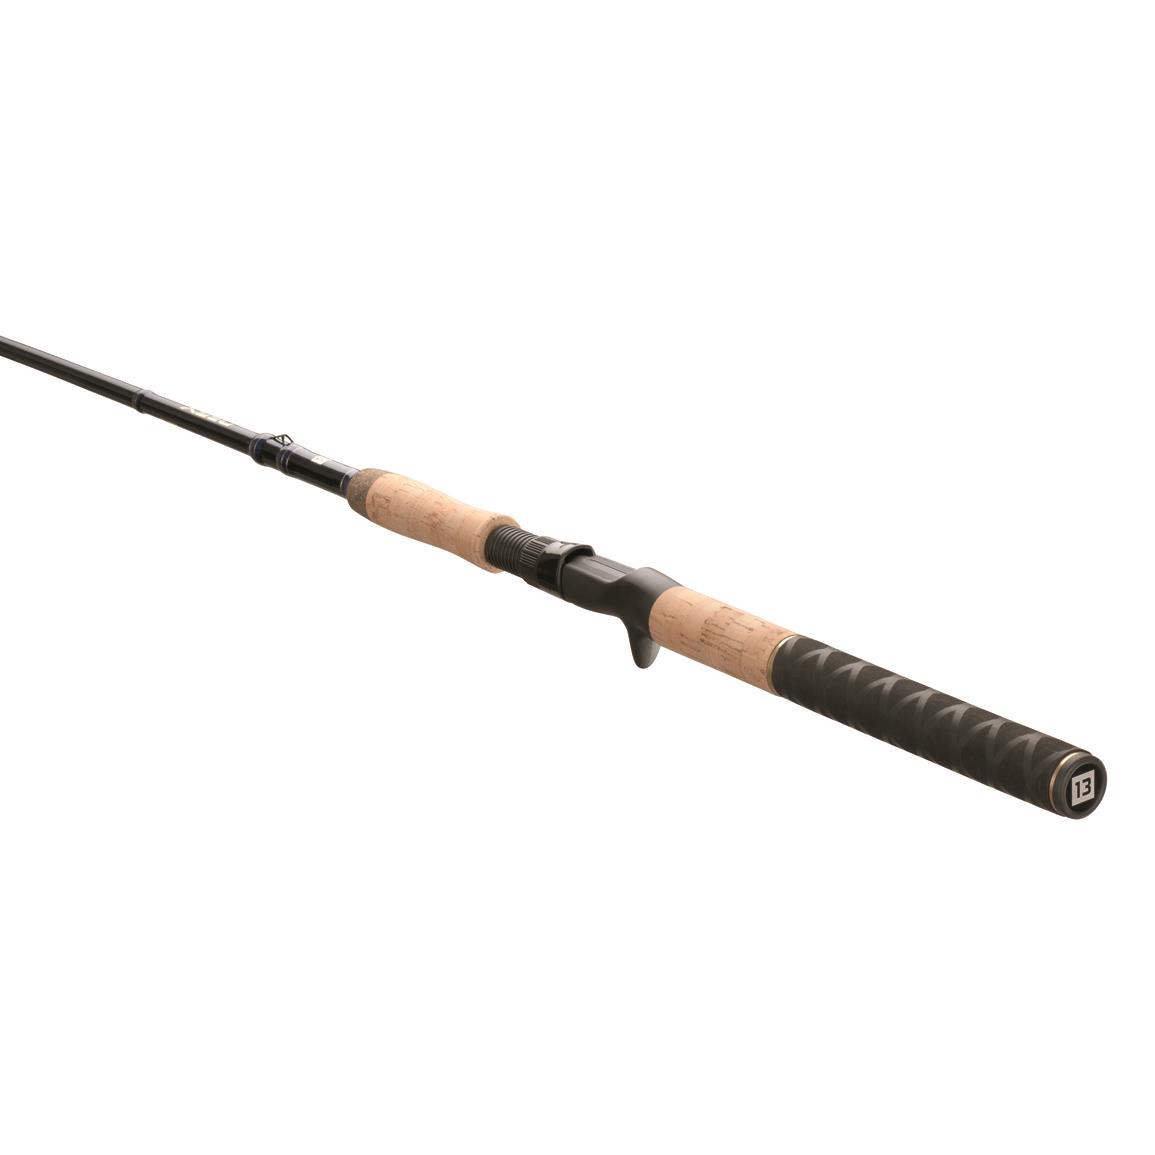 Fishing Rods - Casting, Spinning, Fly Fishing Rods